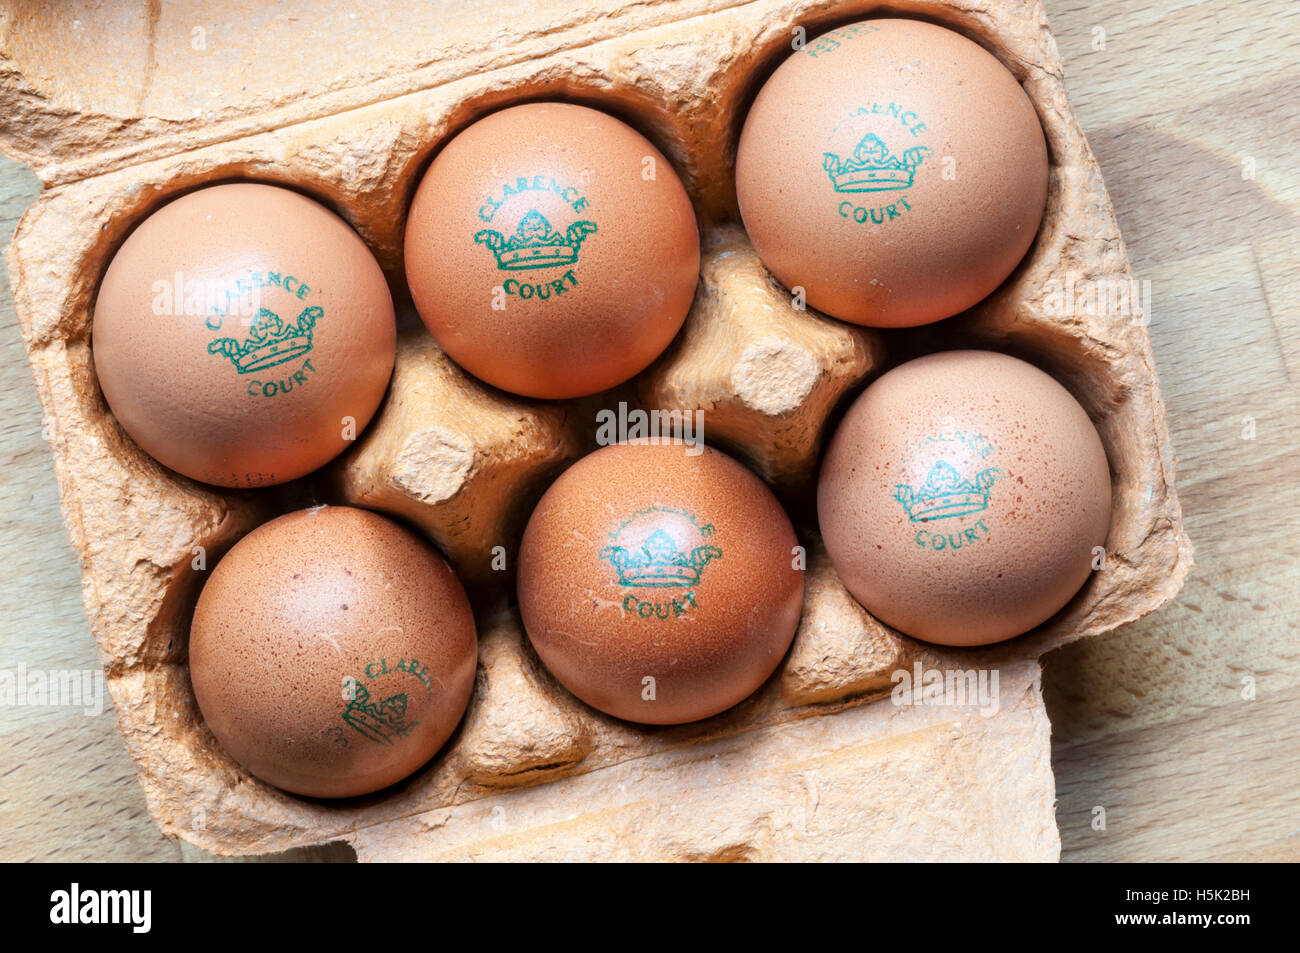 A box of six Clarence Court stamped free-range brown eggs. Stock Photo